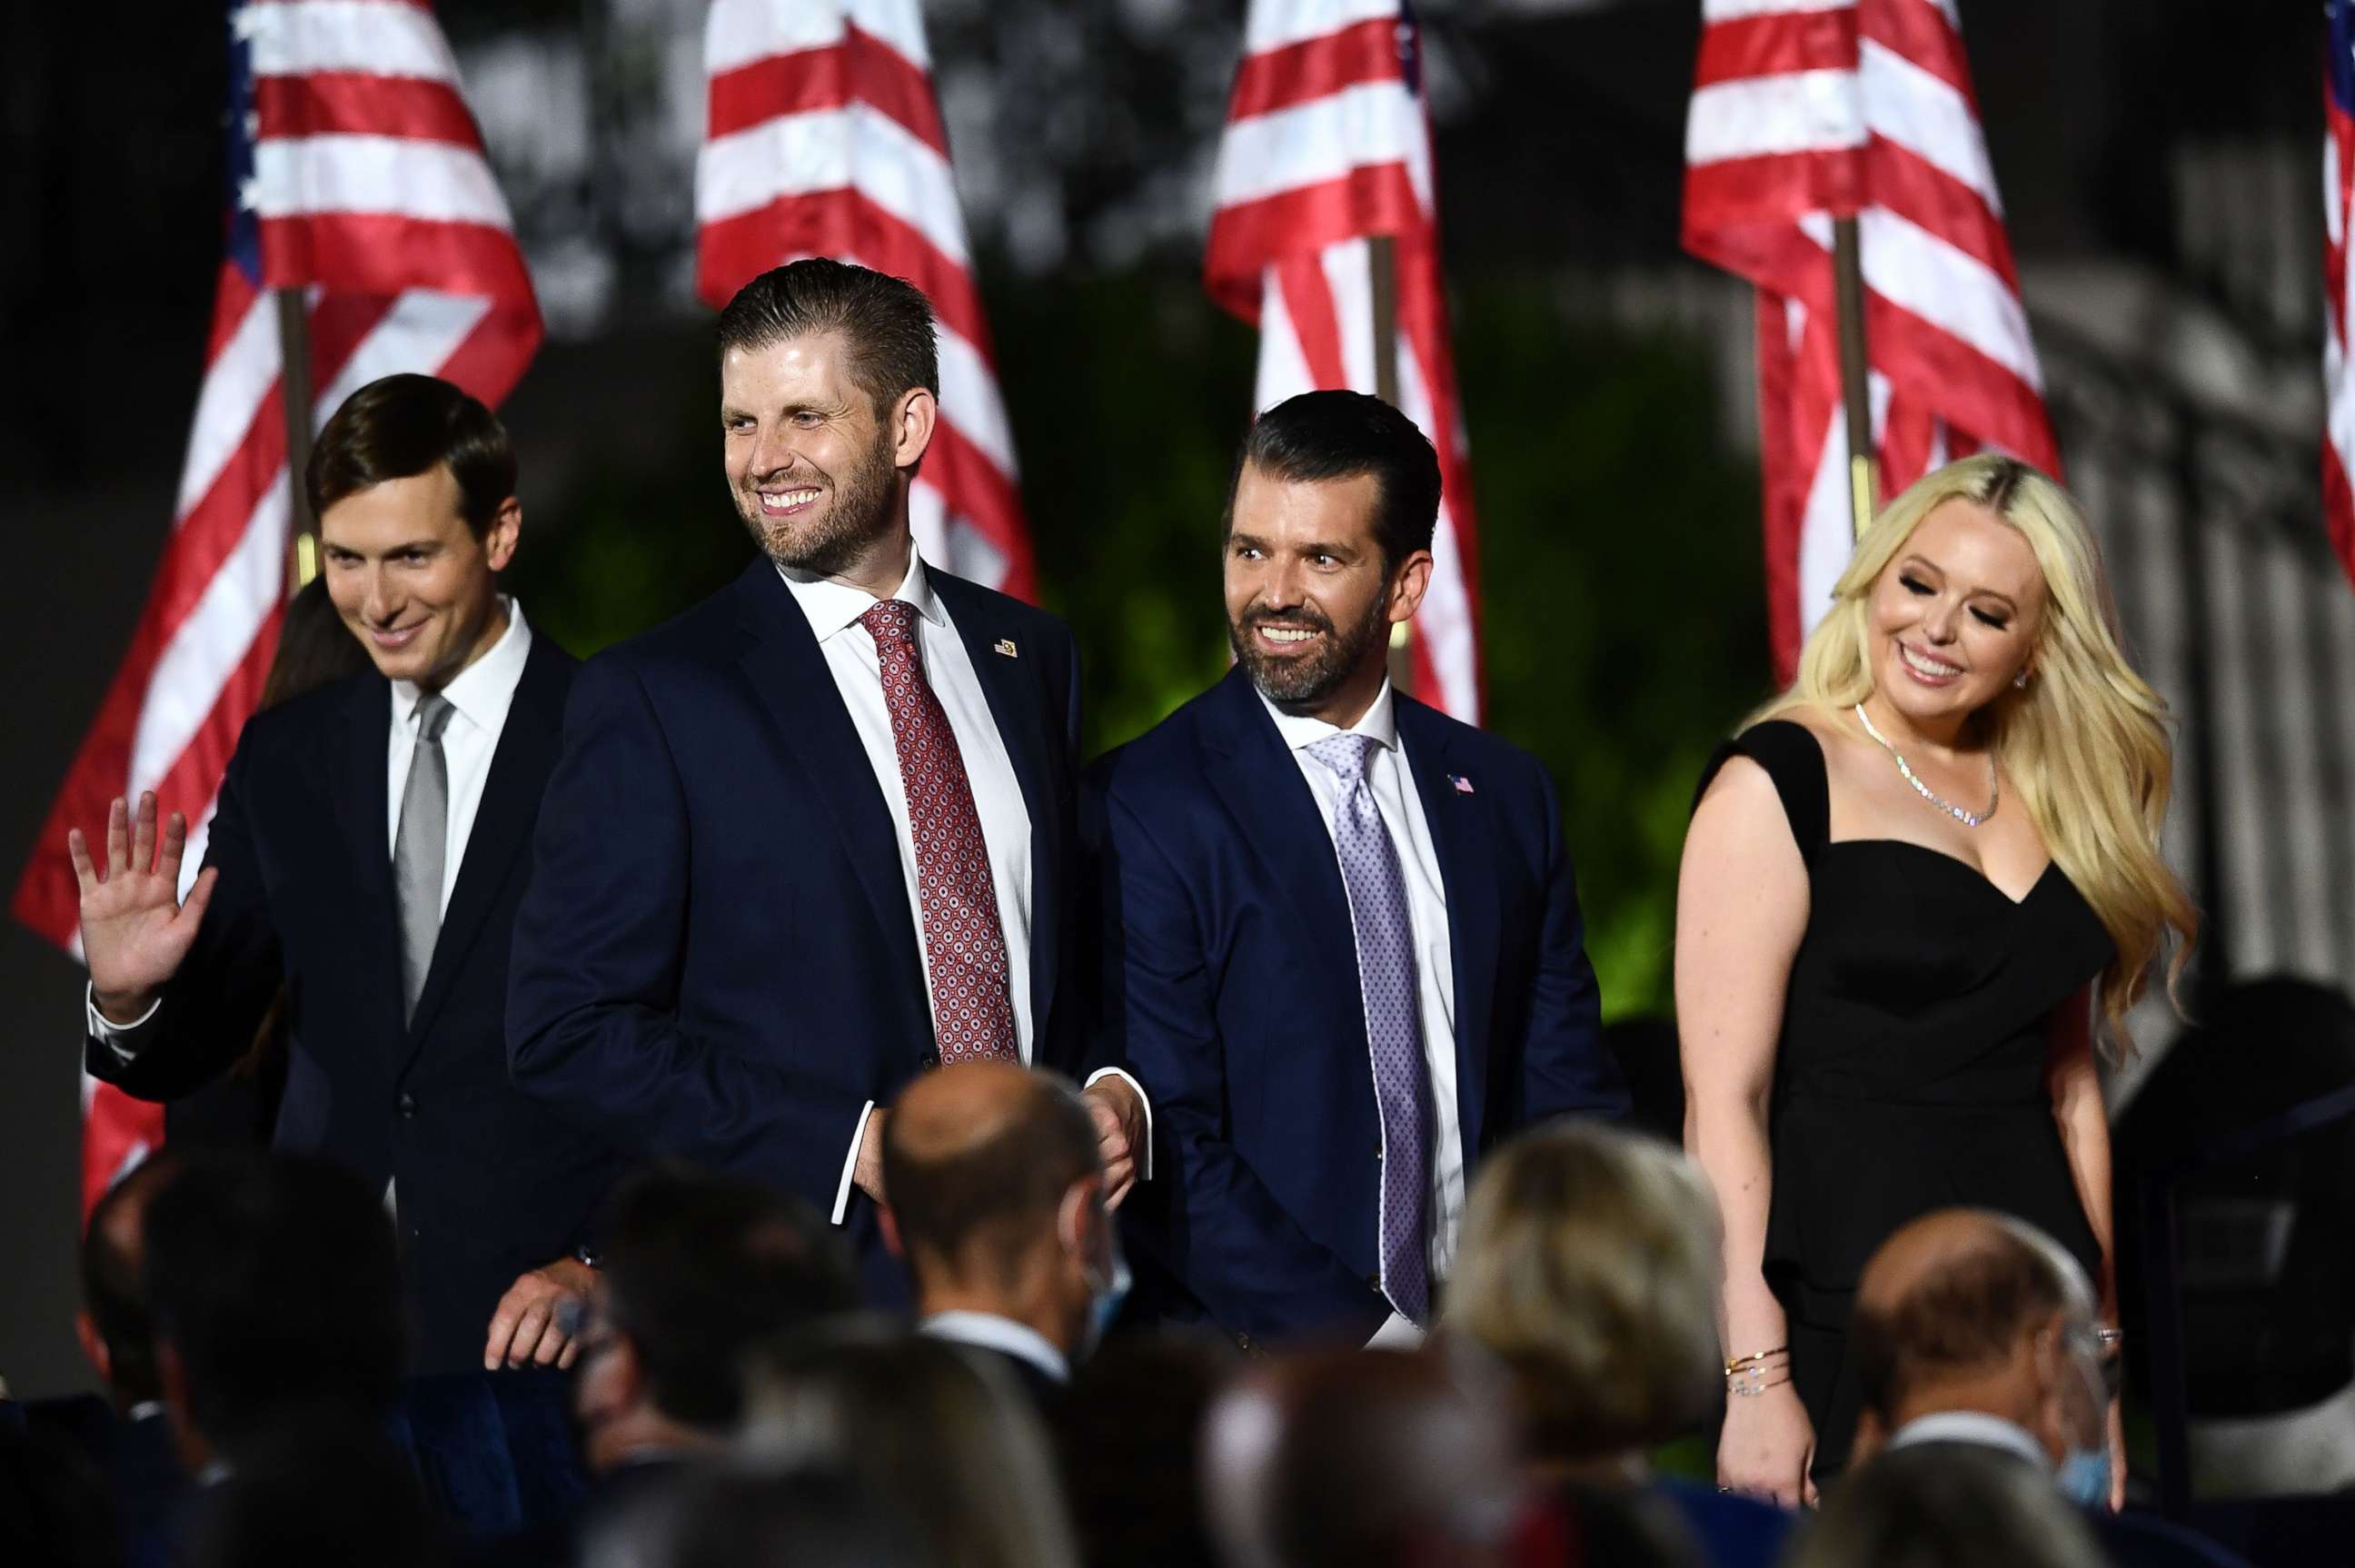 PHOTO: Eric Trump and Donald Trump Jr. are seen onstage ahead of President Donald Trump's acceptance speech for the Republican Party nomination for reelectionon the South Lawn of the White House, Aug. 27, 2020.